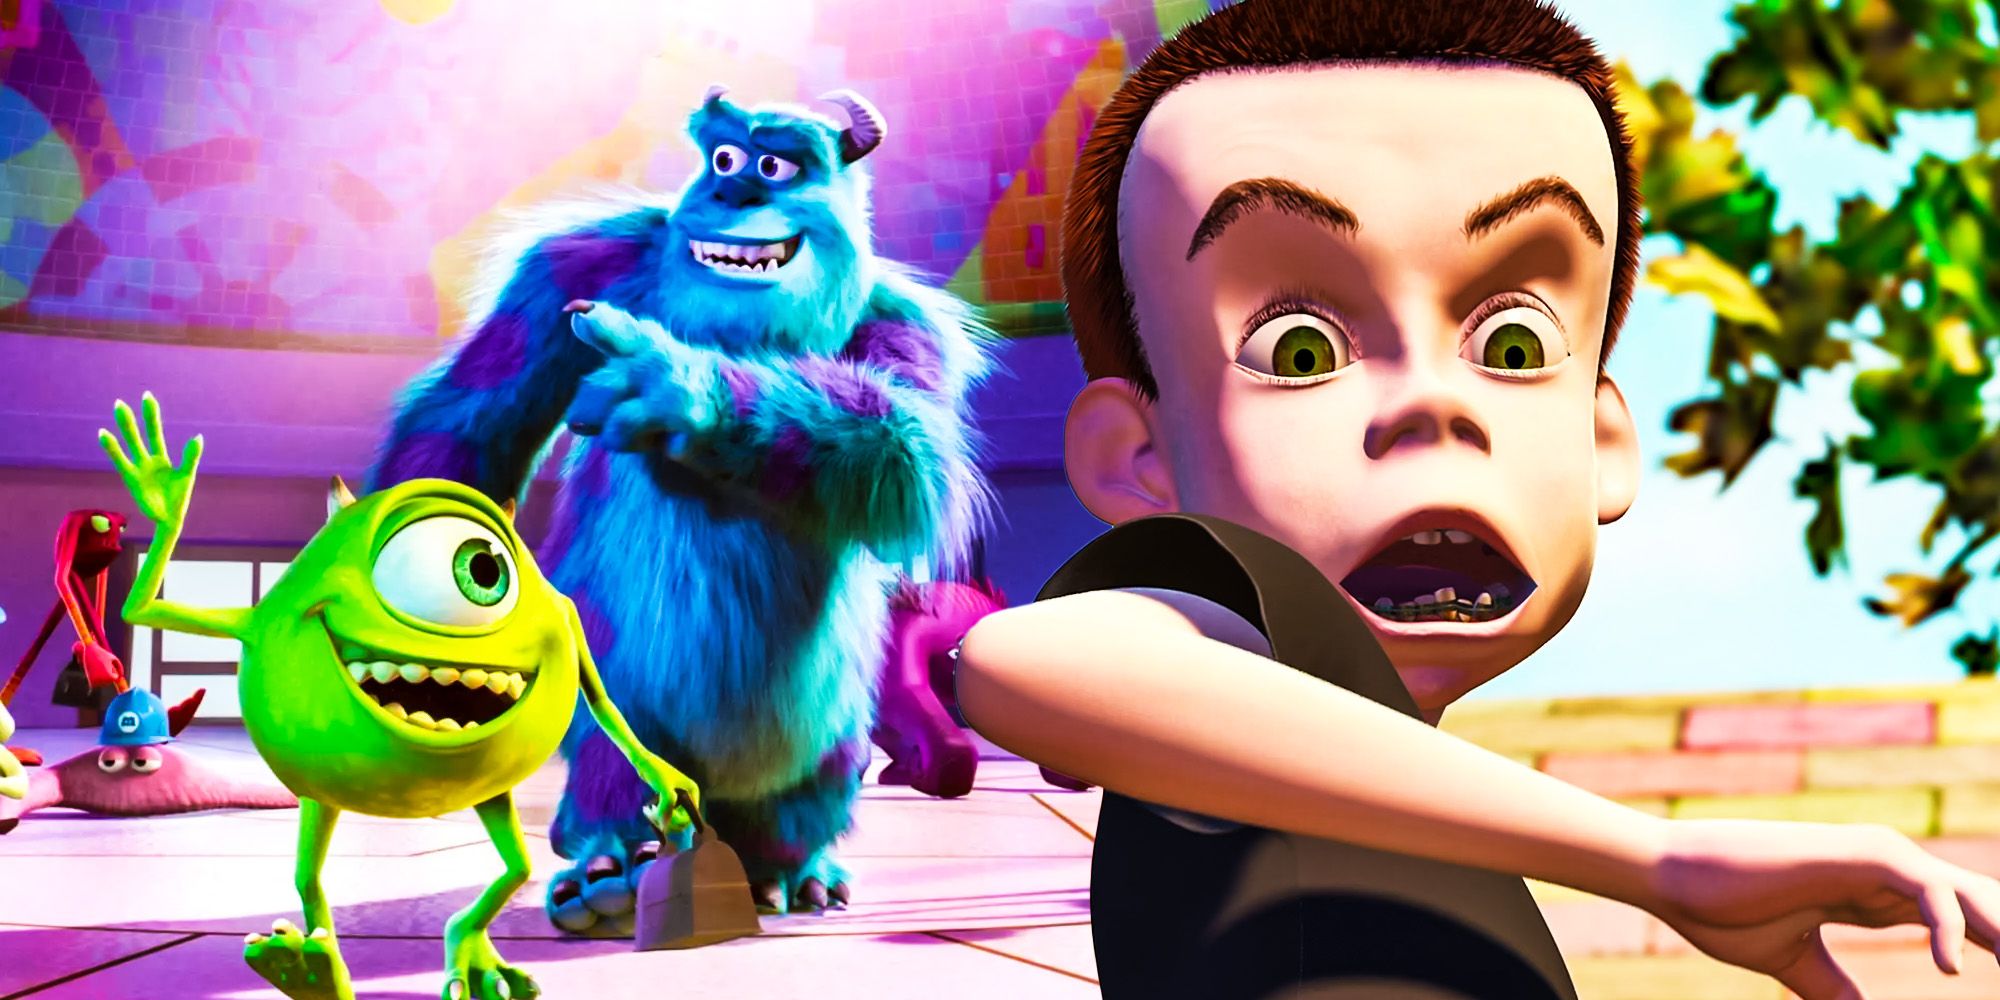 Toy story monsters inc pixar crossover